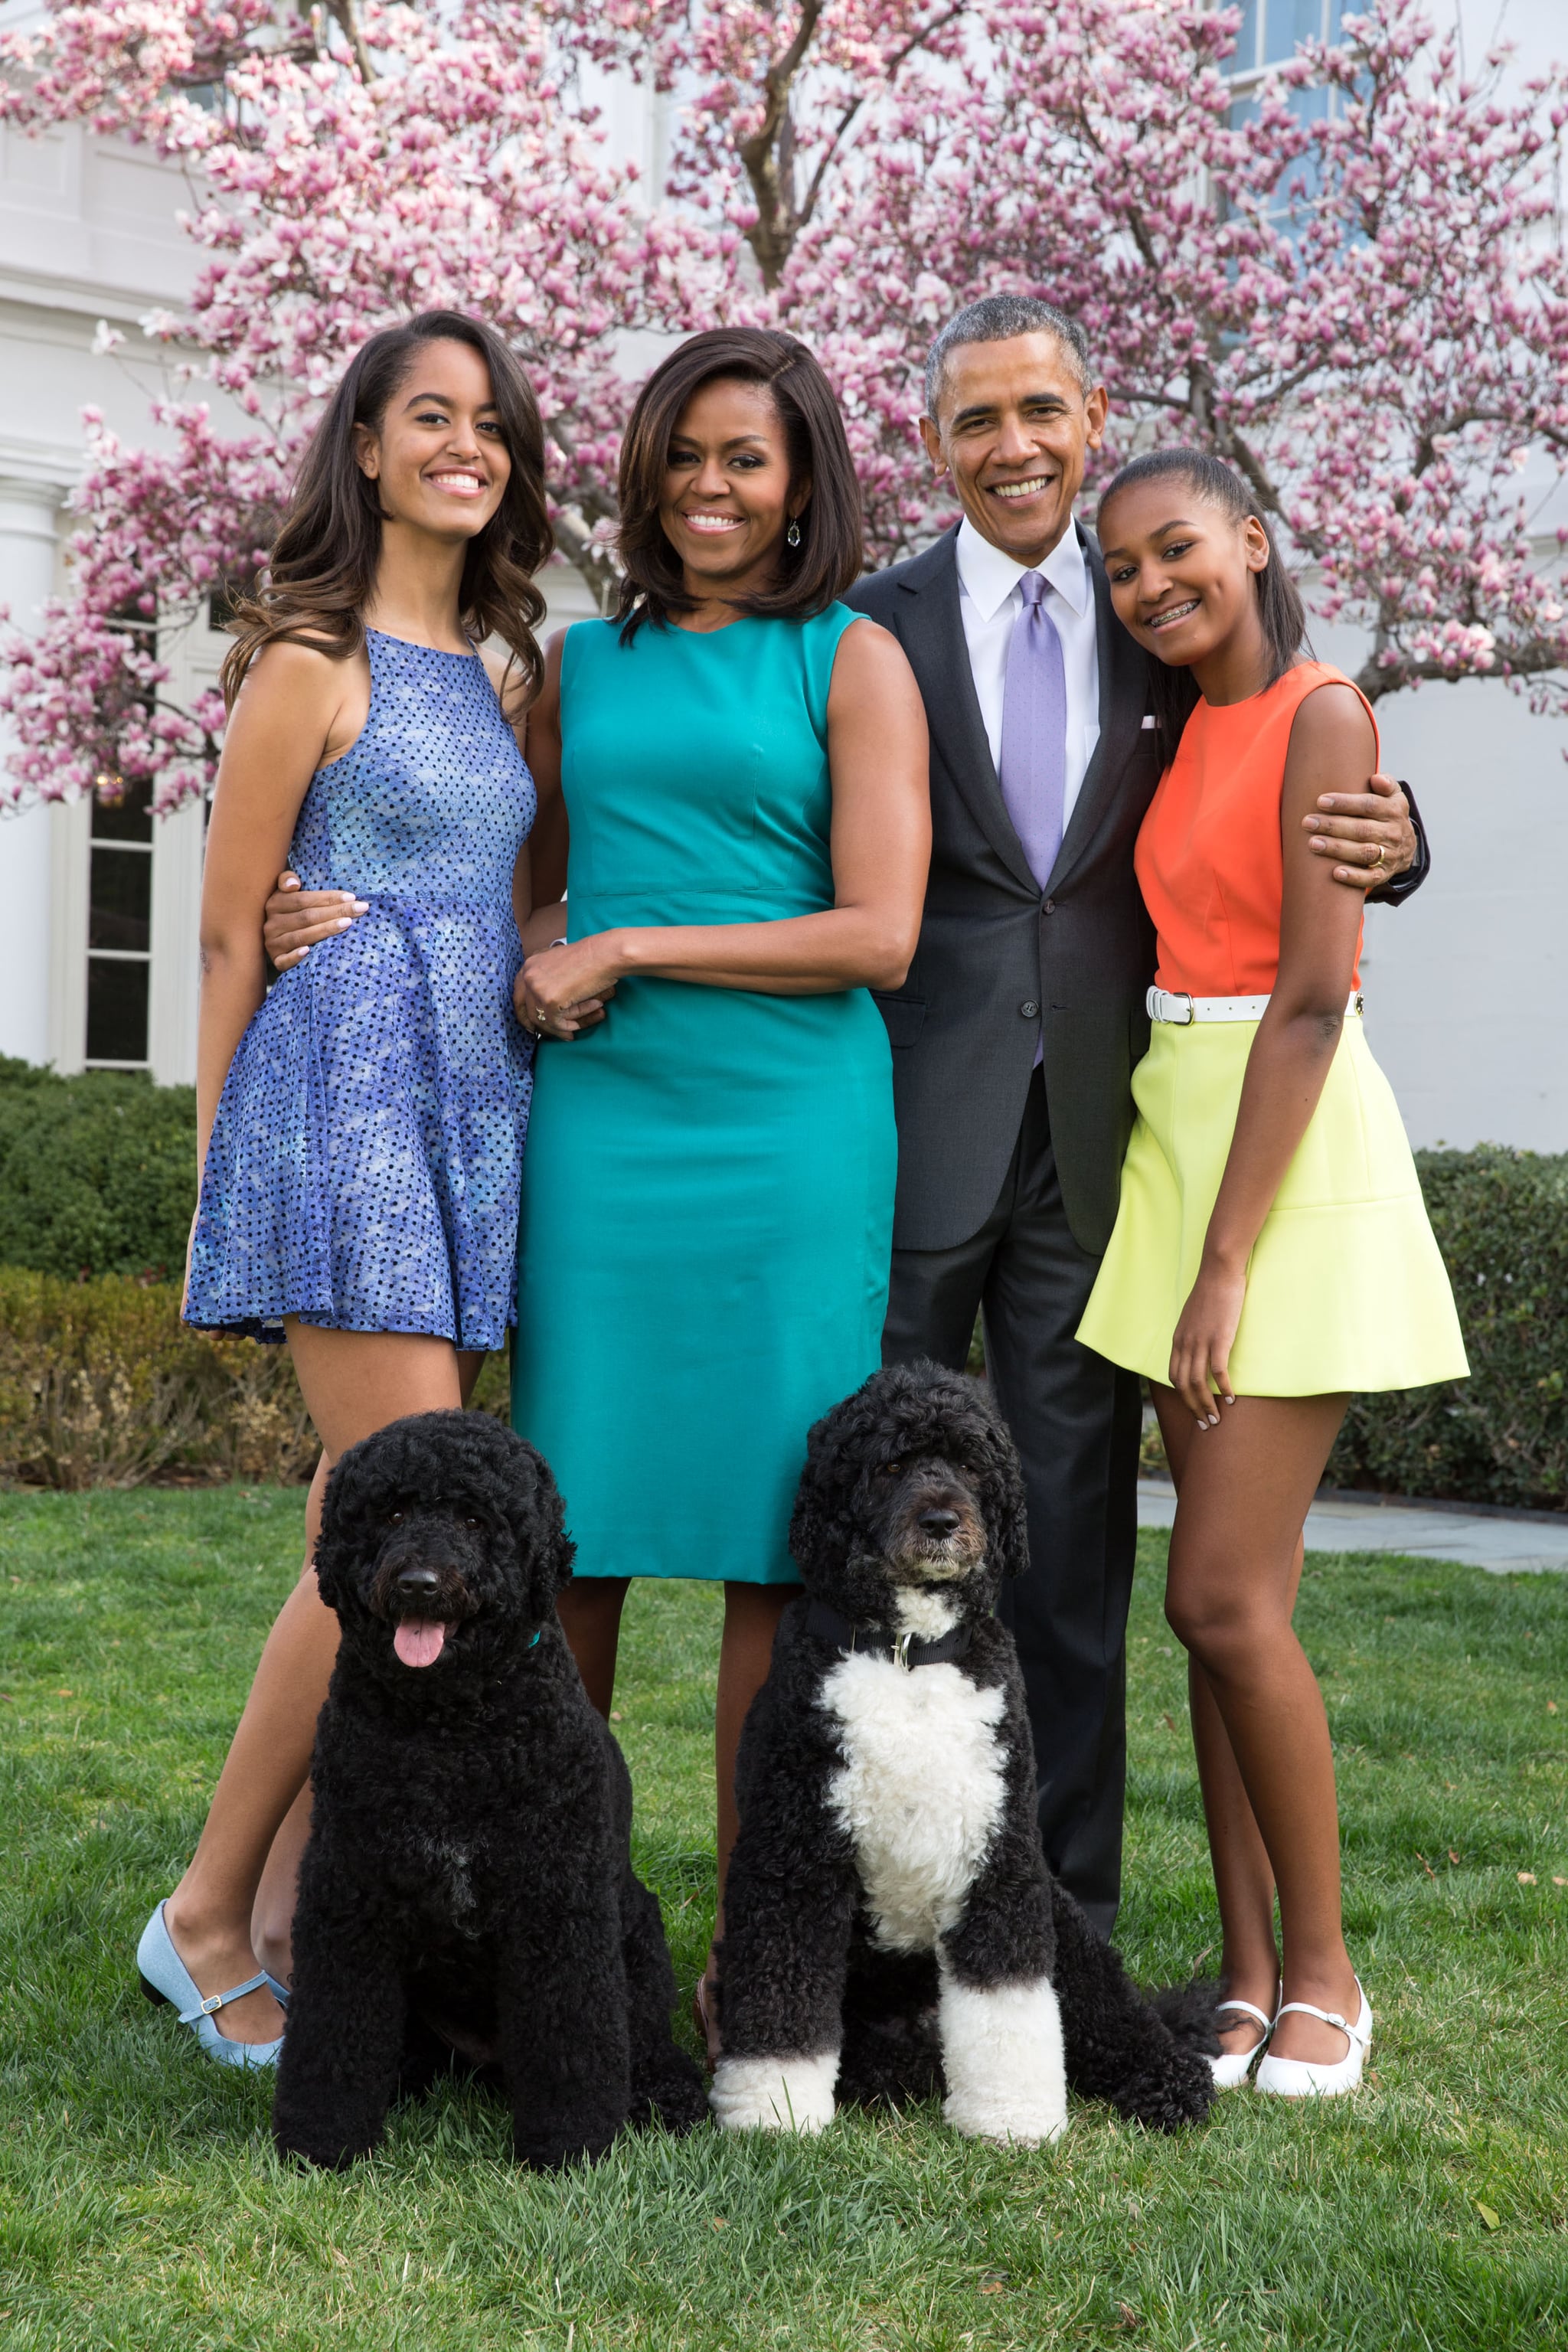 WASHINGTON, DC - APRIL 05: U.S. President Barack Obama, First Lady Michelle Obama, and daughters Malia (L) and Sasha (R) pose for a family portrait with their pets Bo and Sunny in the Rose Garden of the White House on Easter Sunday, April 5, 2015 in Washington, DC. (Photo by Pete Souza/The White House via Getty Images)